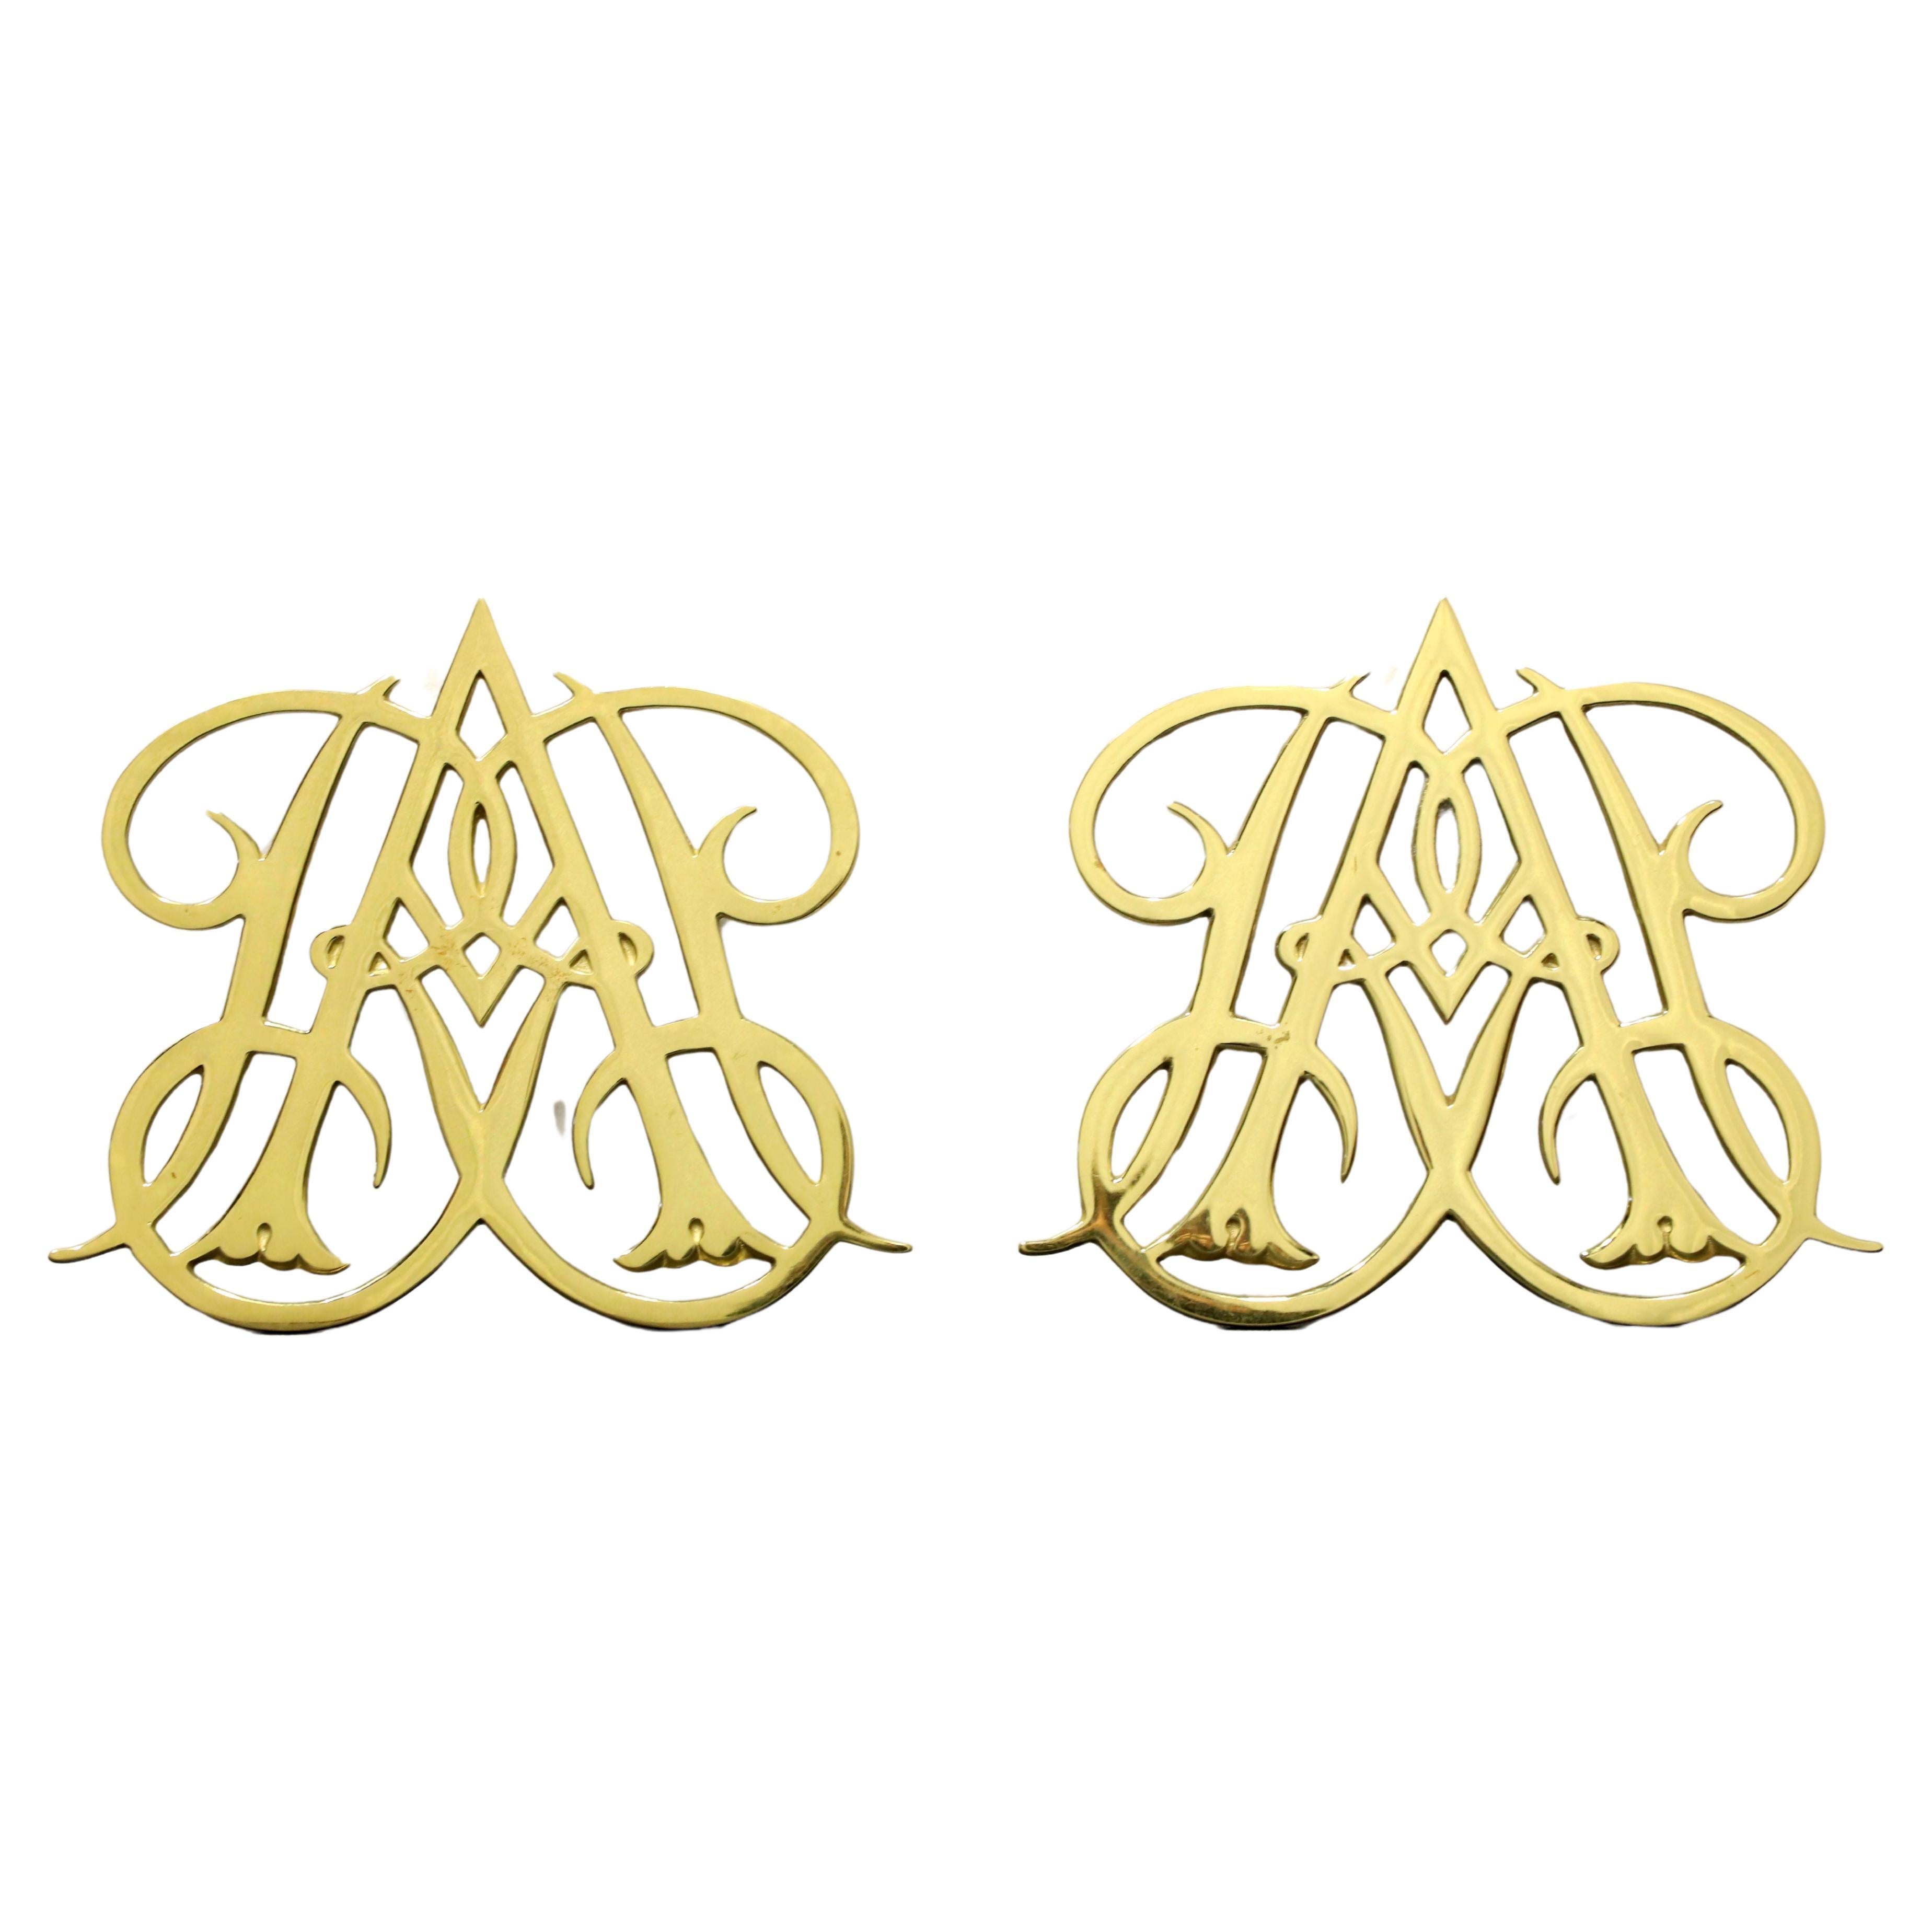 VIRGINIA METALCRAFTERS Brass Williamsburg Queen Anne Cypher Trivets - Pair For Sale